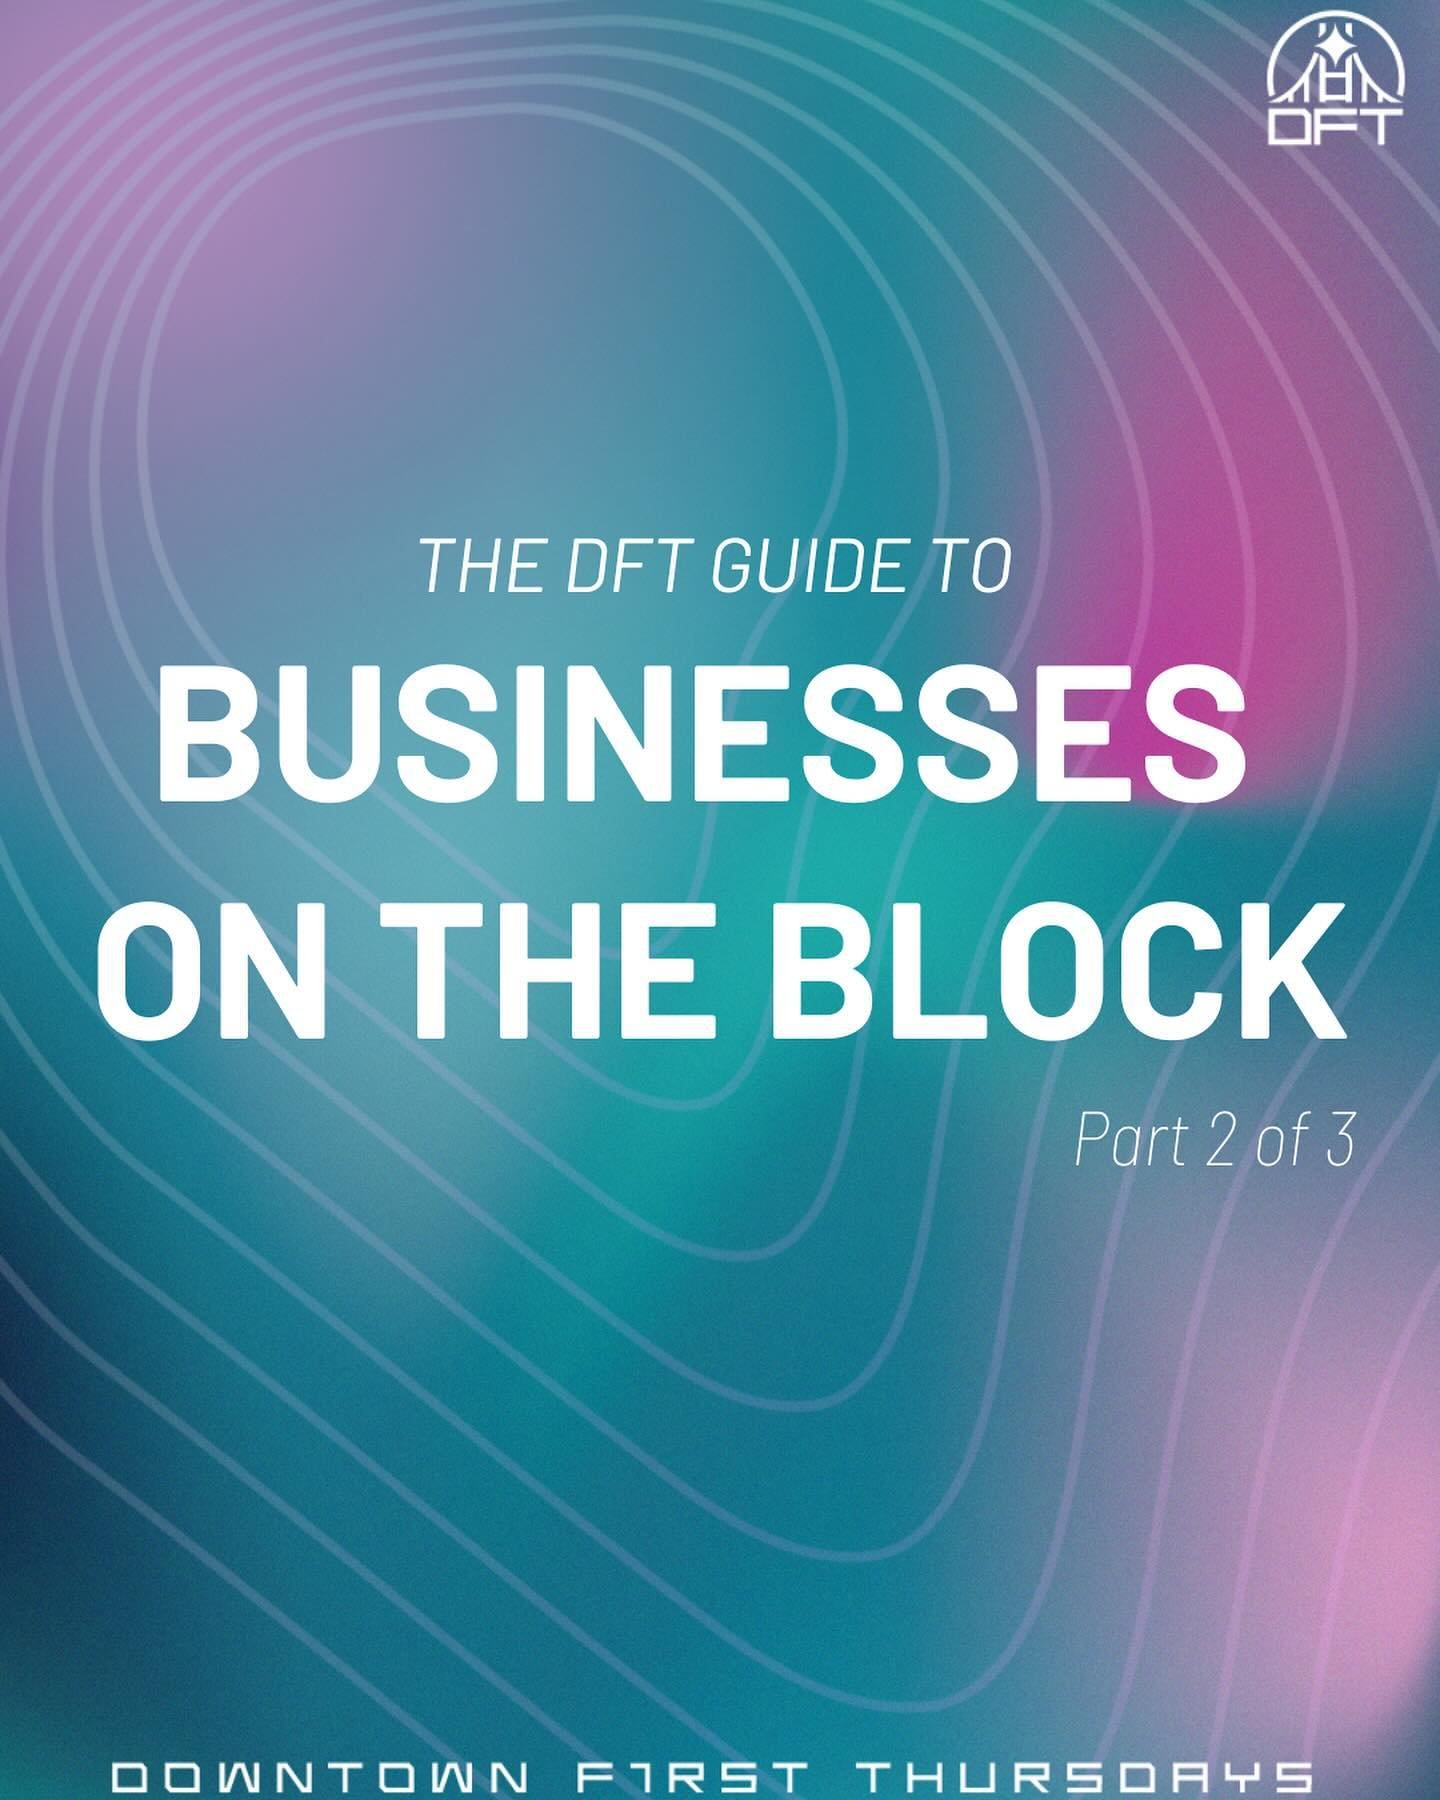 😋 One post wasn&rsquo;t enough&mdash; here&rsquo;s a Part 2 of DFT&rsquo;s guide to the businesses on the block!

🍴 We&rsquo;re so excited to be sharing this space with these wonderful brick &amp; mortar businesses who&rsquo;ve been keeping the peo